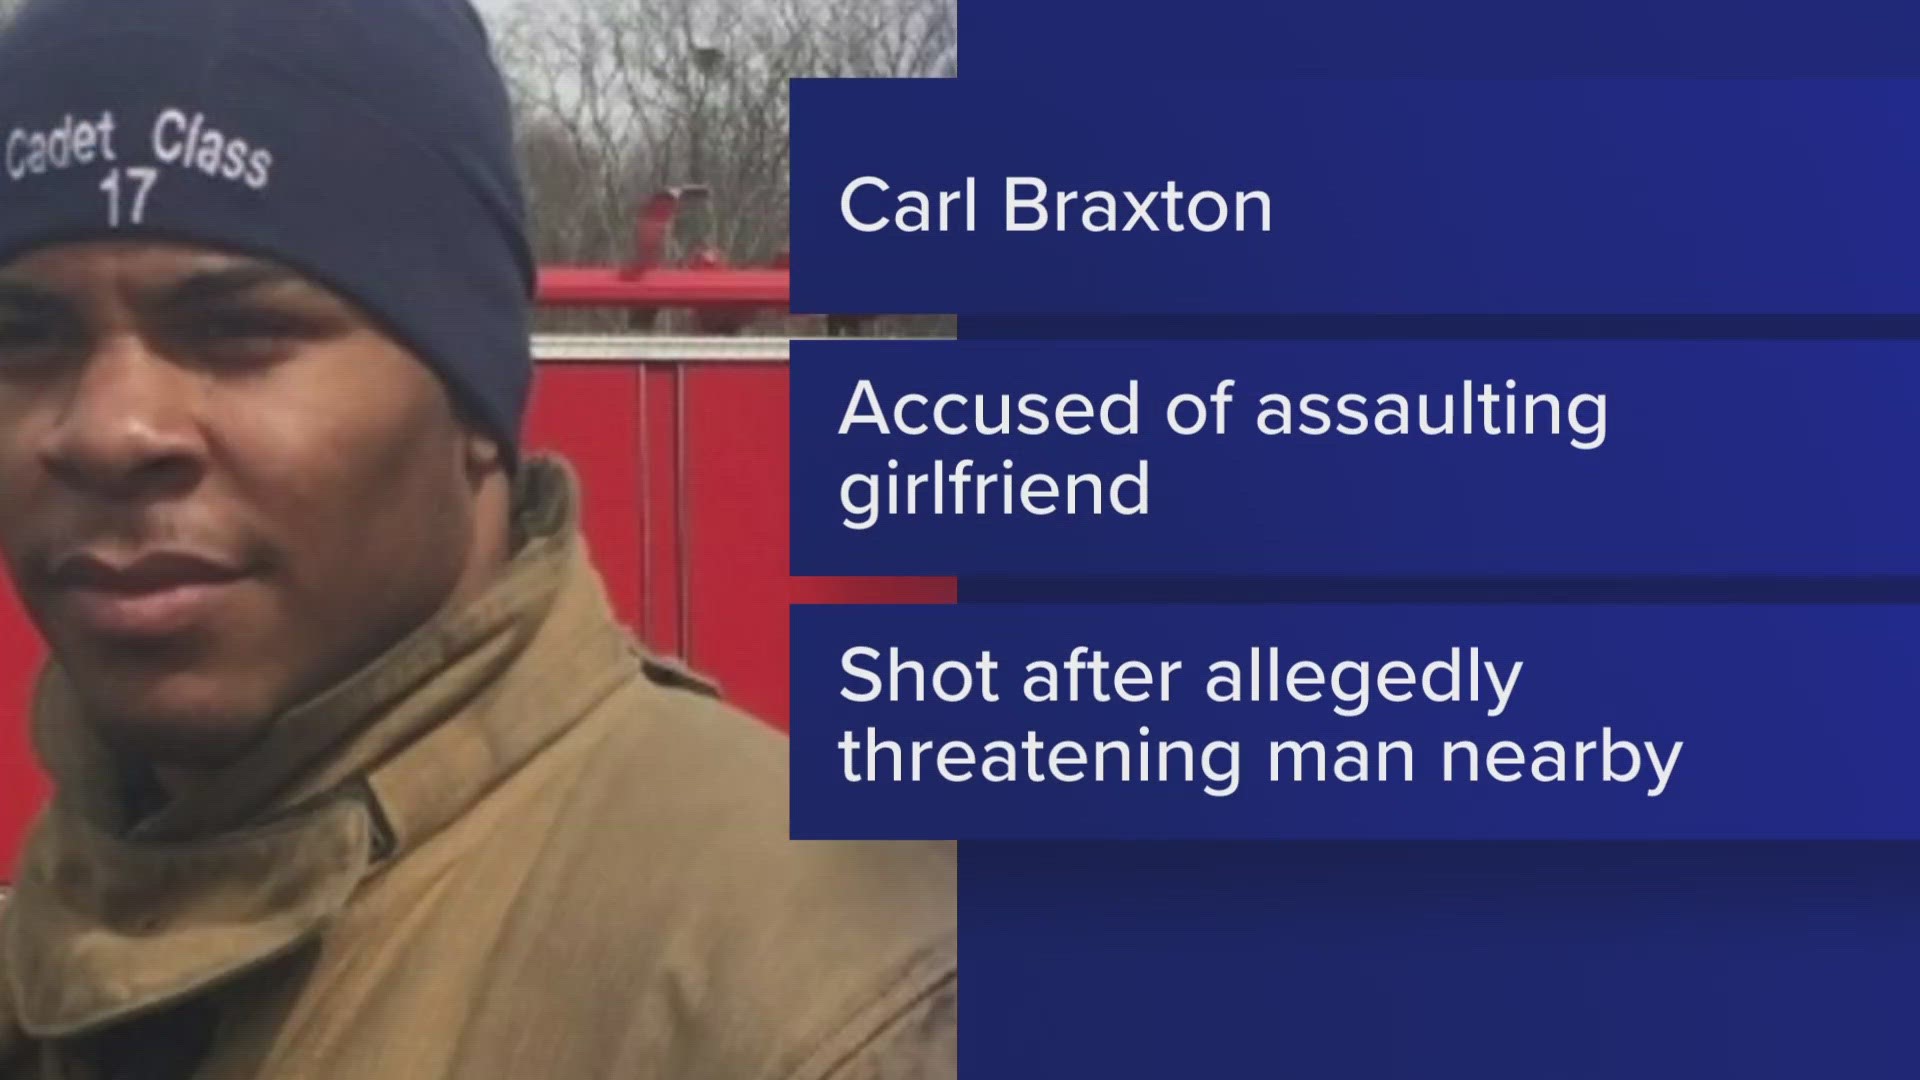 The sheriff's office claims firefighter Carl Braxton assaulted his girlfriend inside their townhouse before the shooting.